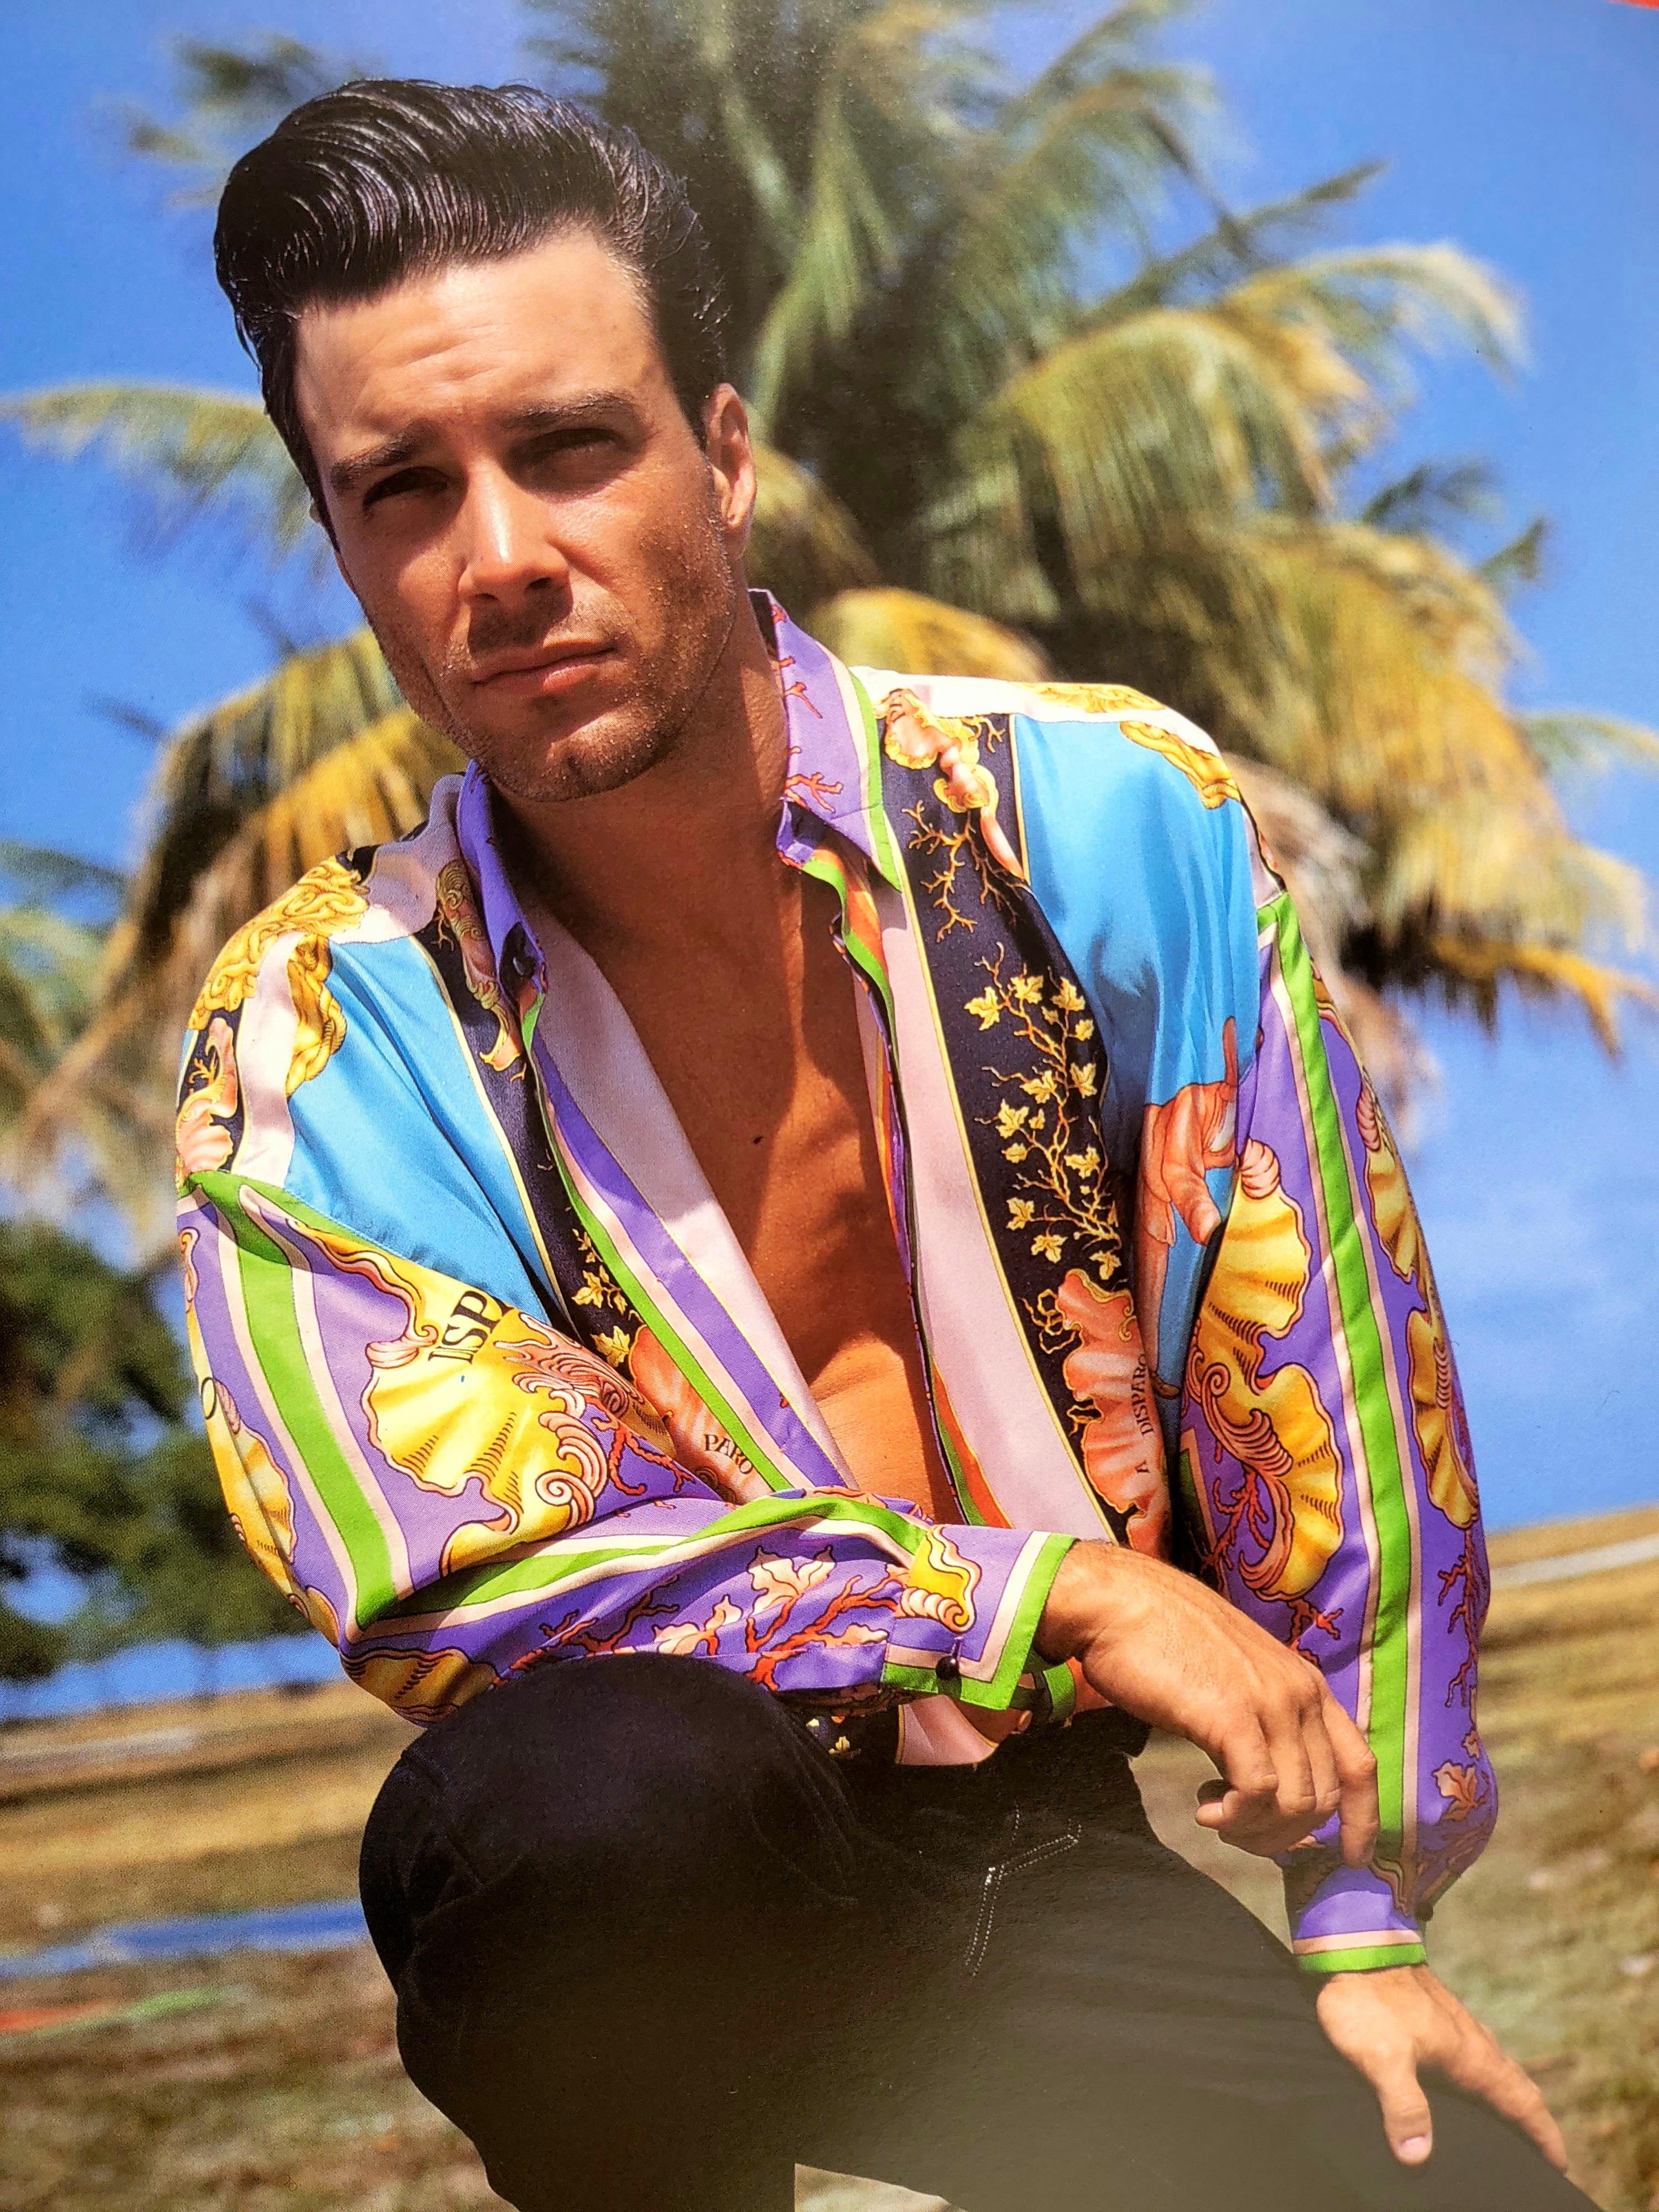 Gianni Versace Silk Men's Shirt from SS 1993.

This shirt has the “Naples“ print which shows a renaissance festival from the “Return of the feast of the Madonna of the Arc” painting.

This print shirt was shown in the 1993 South Beach Stories Miami